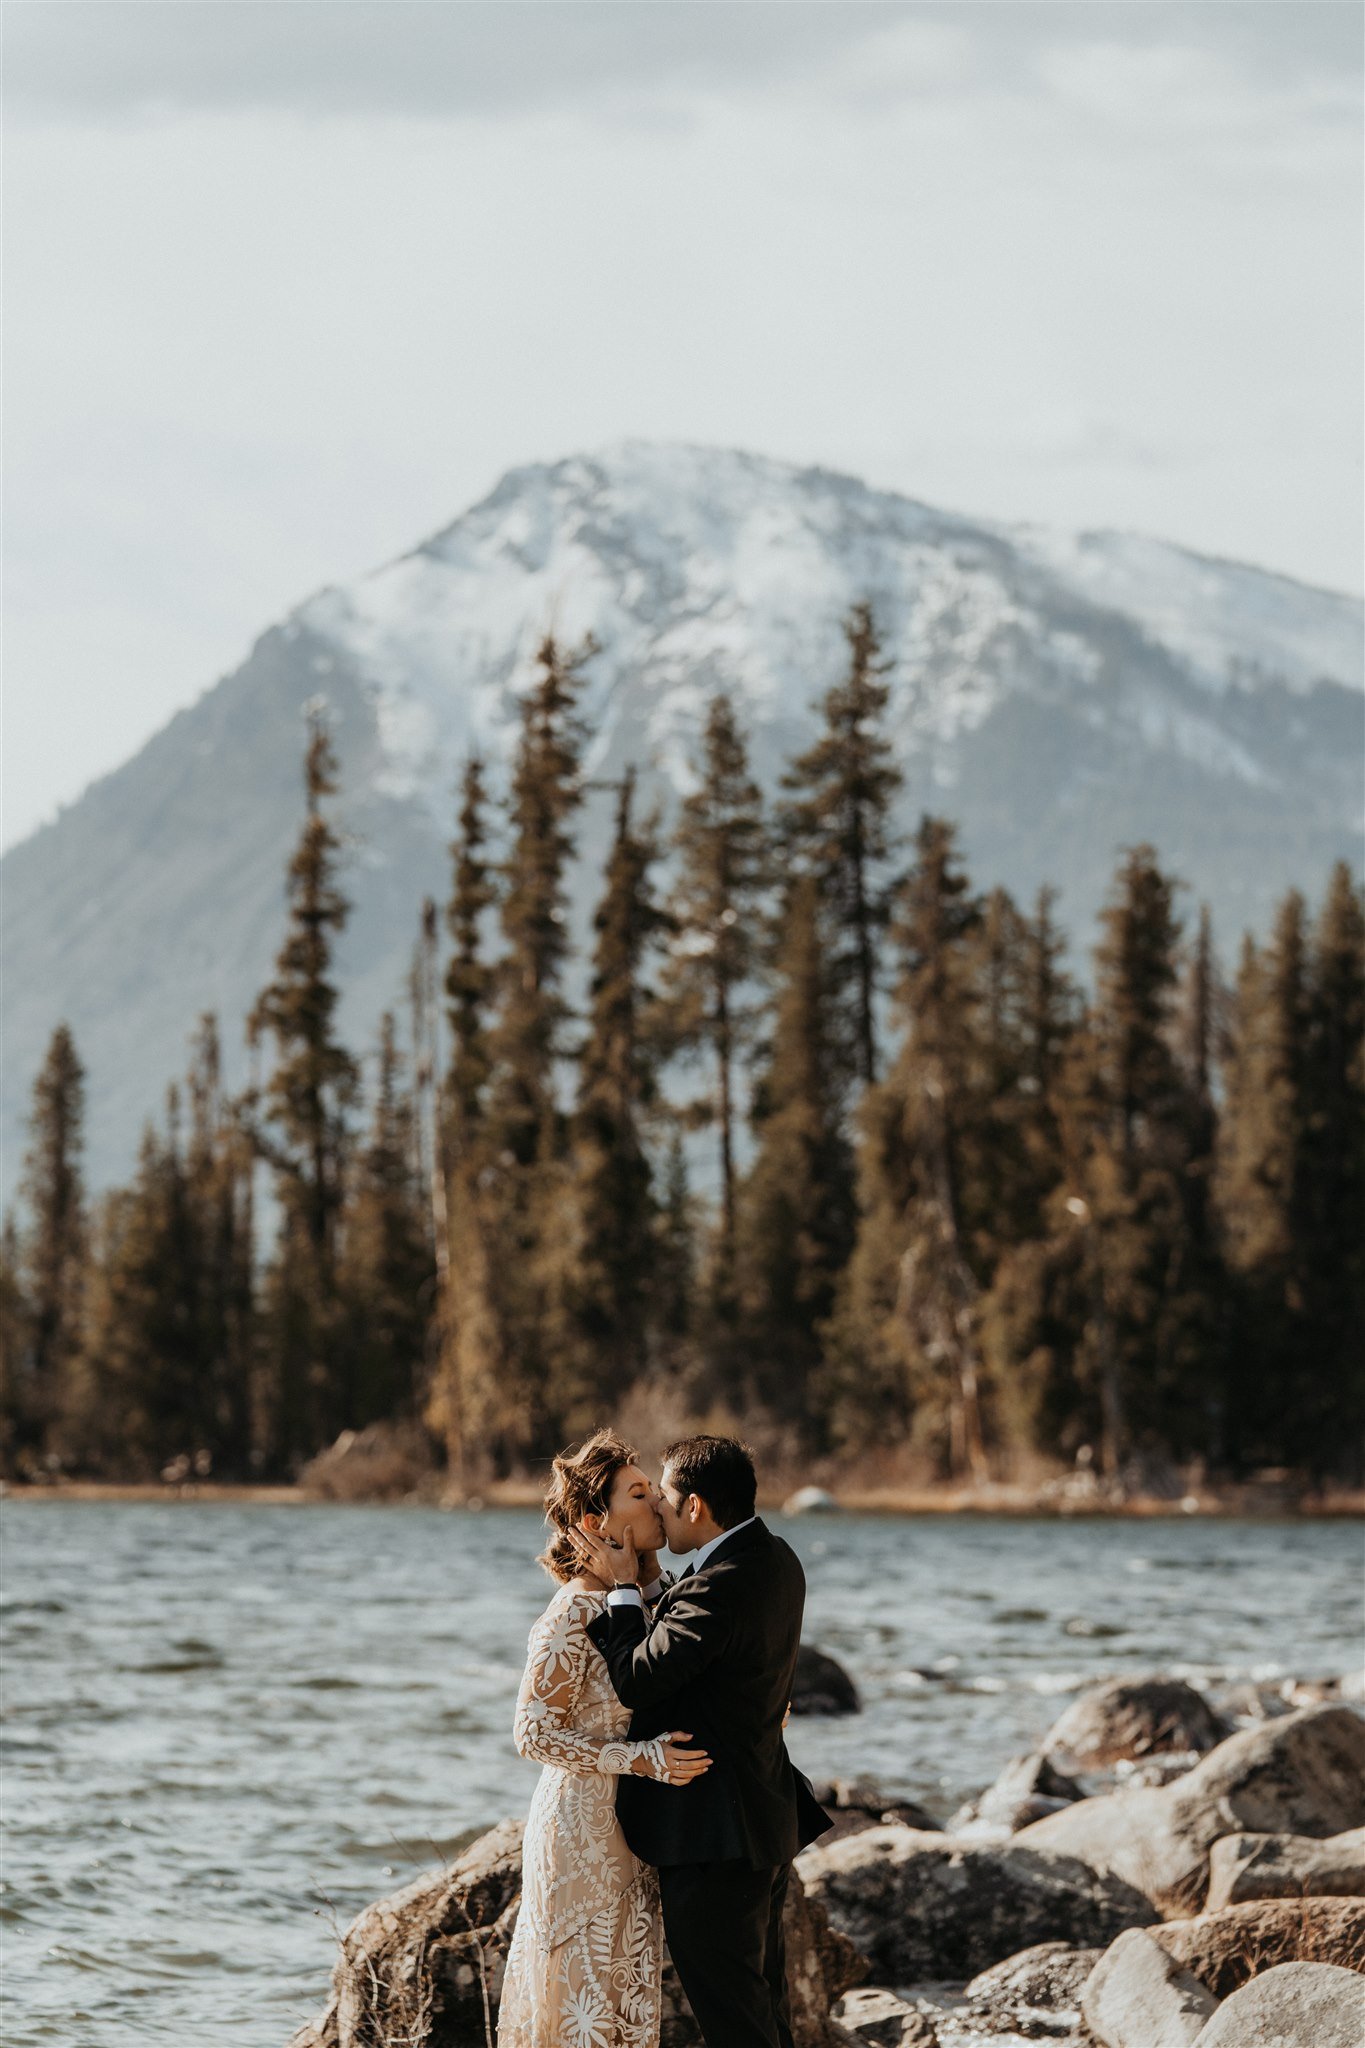 Bride and groom kiss in front of the lake and mountains at Lake Wenatchee